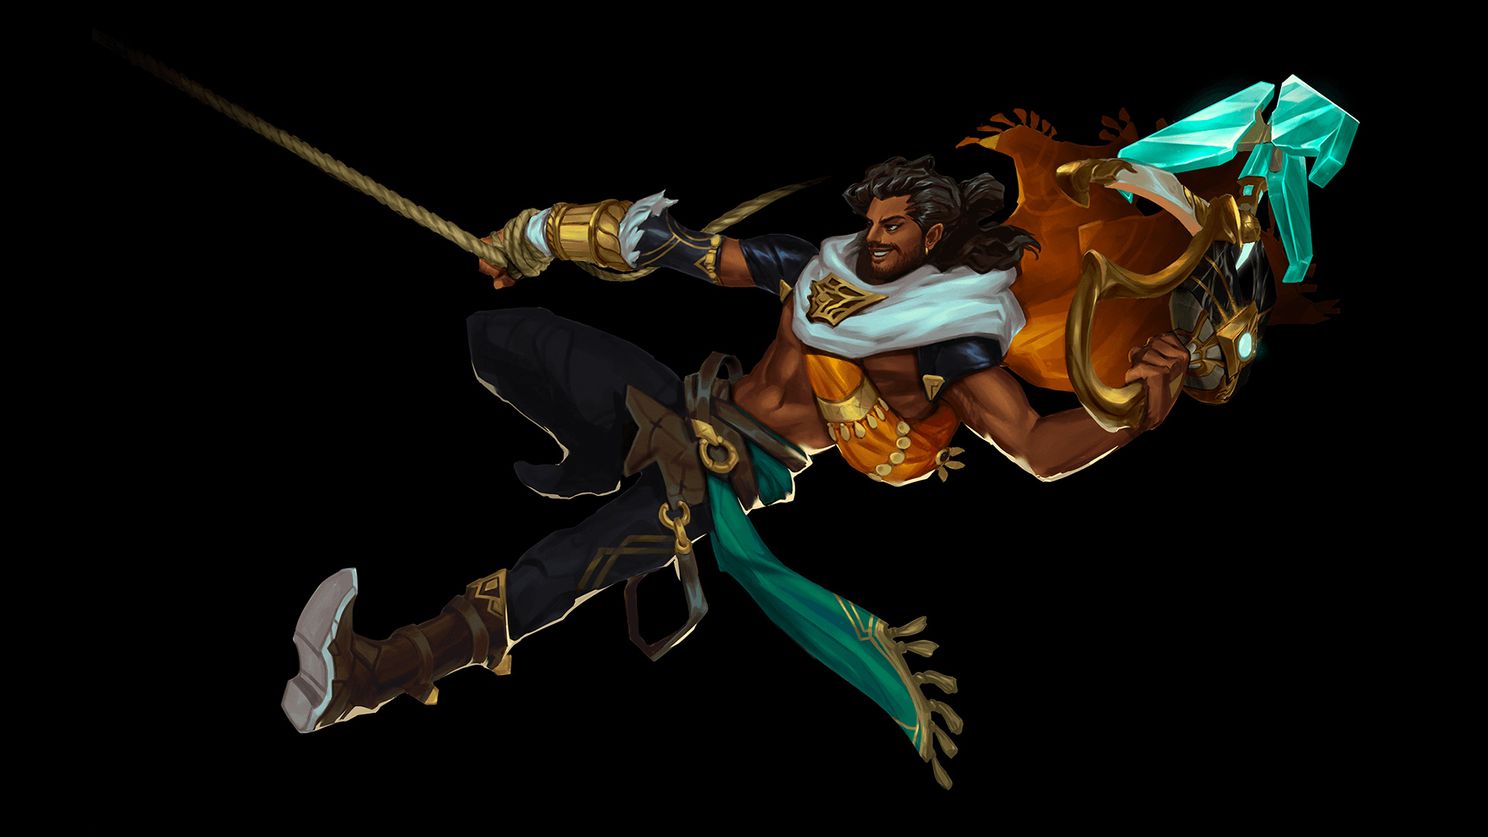 Akshan has a lot of mobility and can swing on his rope to engage enemy champions in LoL